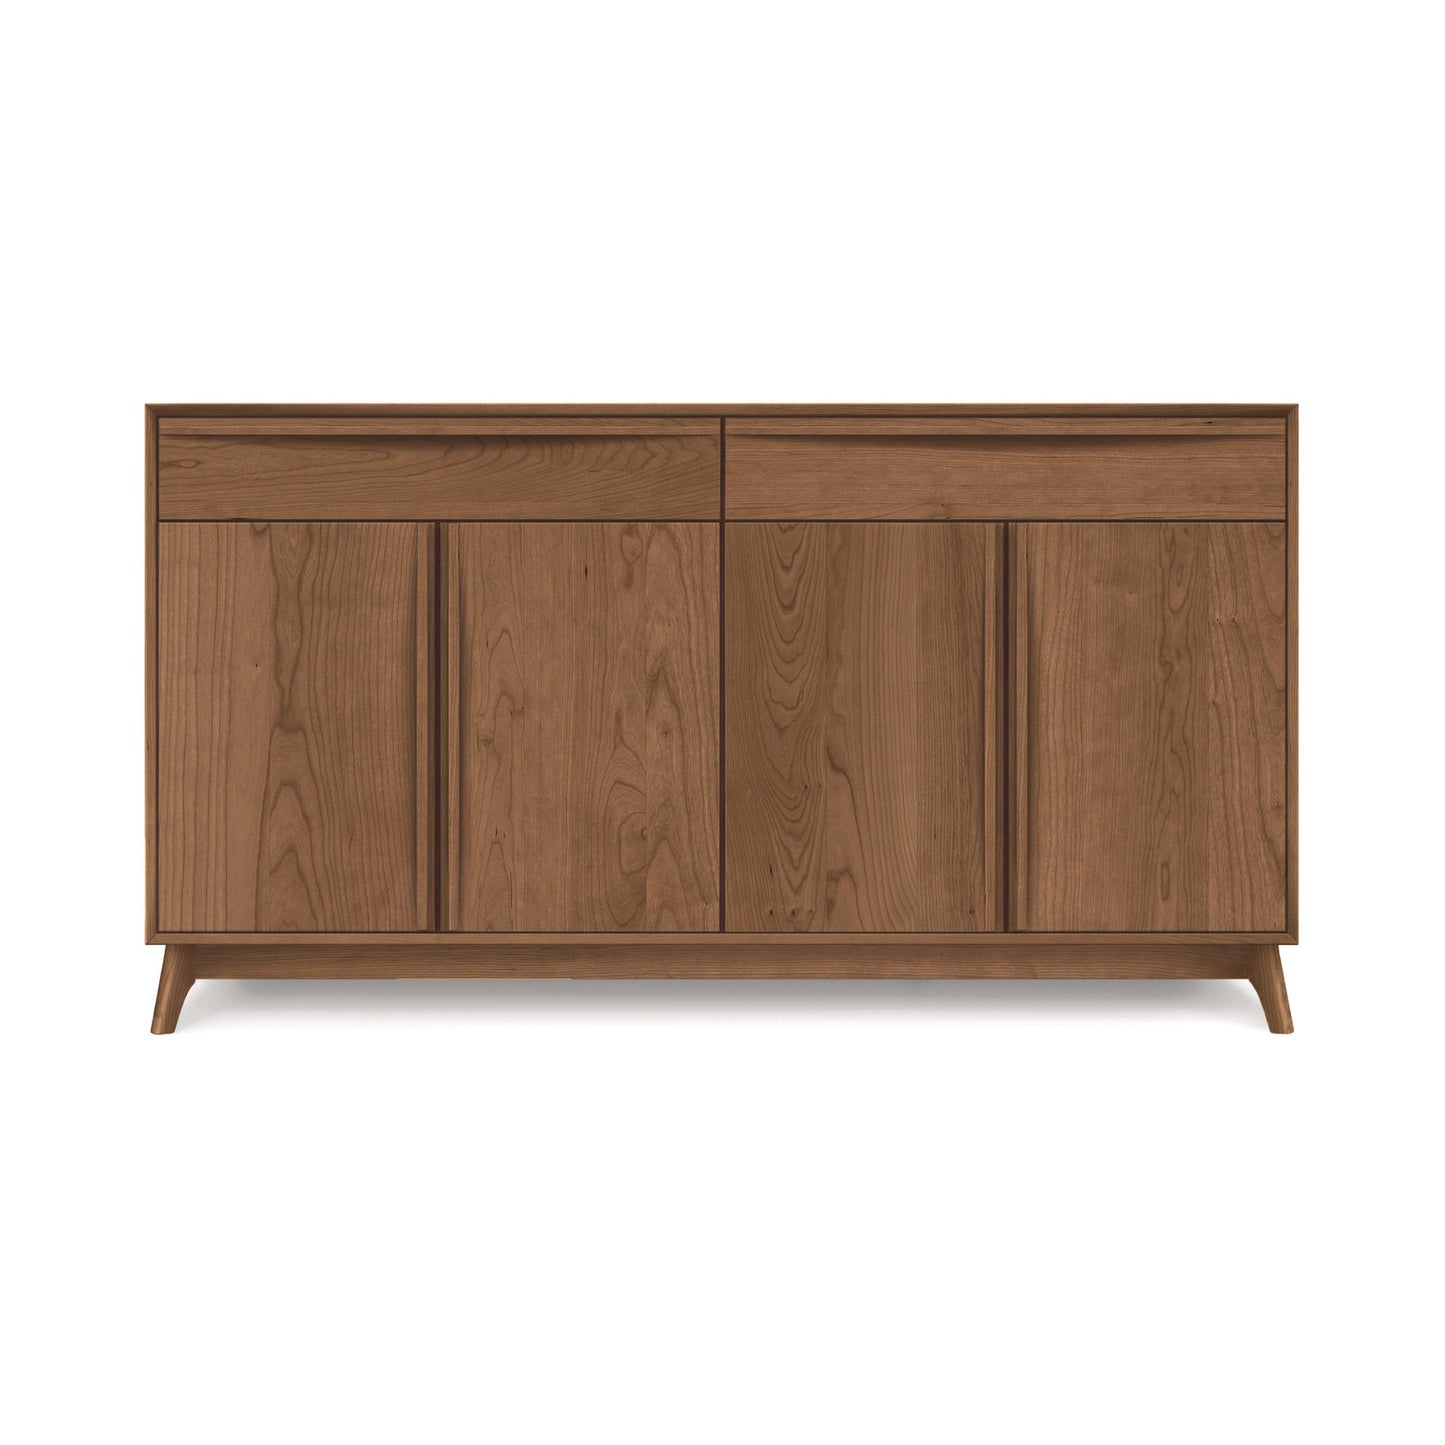 Handcrafted in Vermont, this Copeland Furniture Catalina 2-Drawers, 4-Door Buffet stands against a plain background.